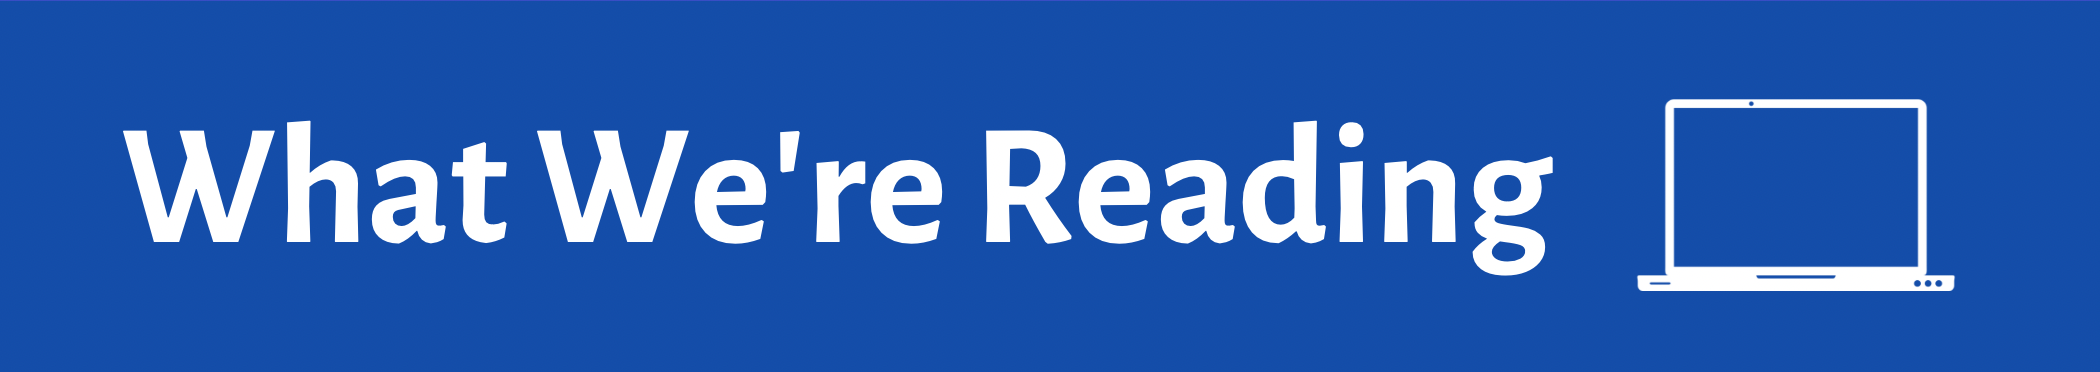 banner for what we are reading